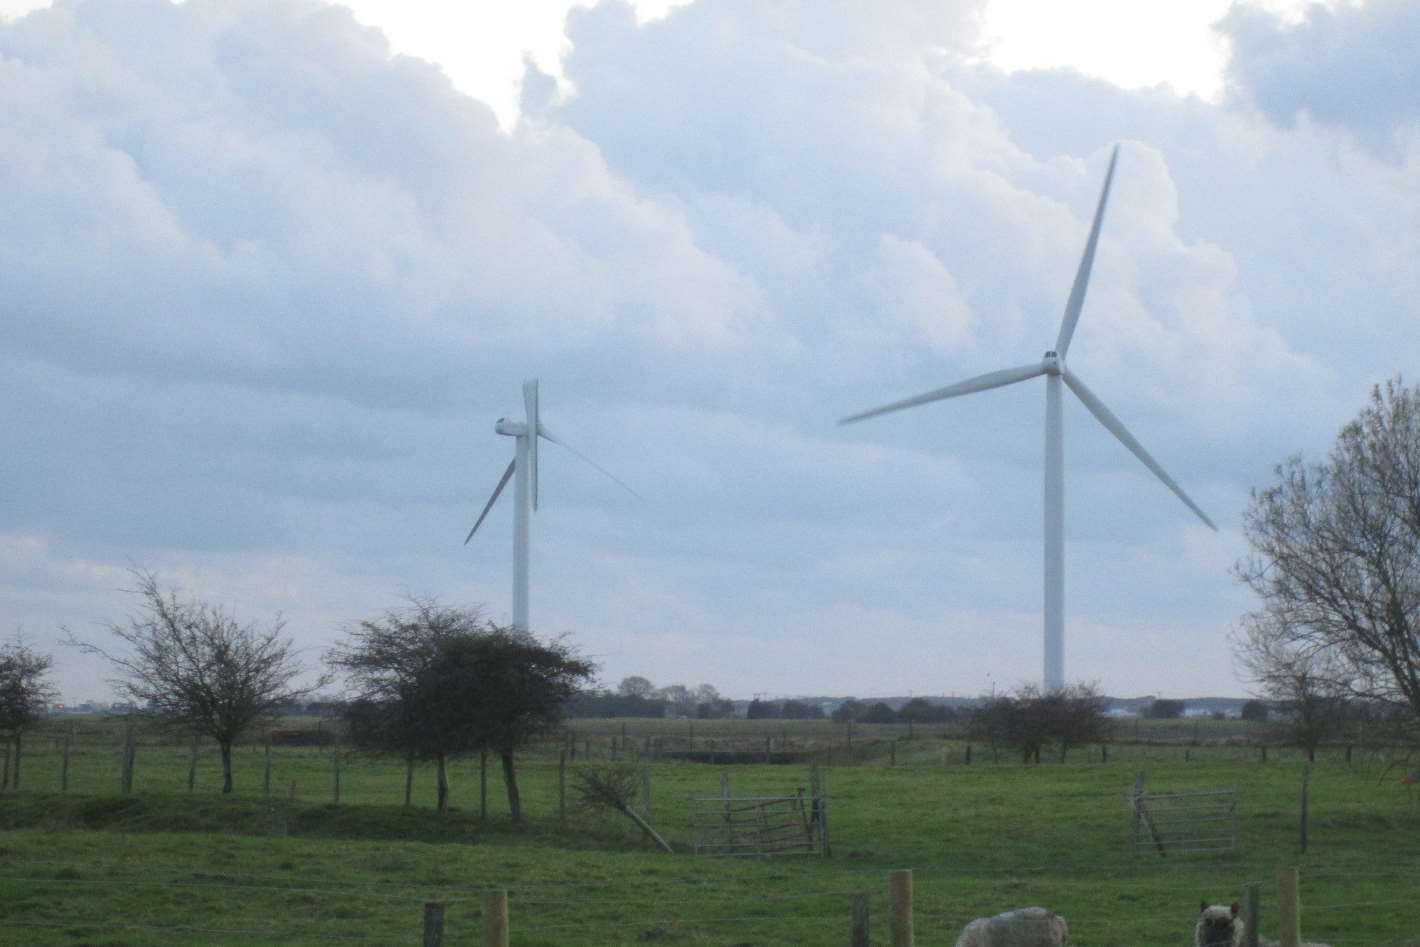 The turbine is one of 26 in the area